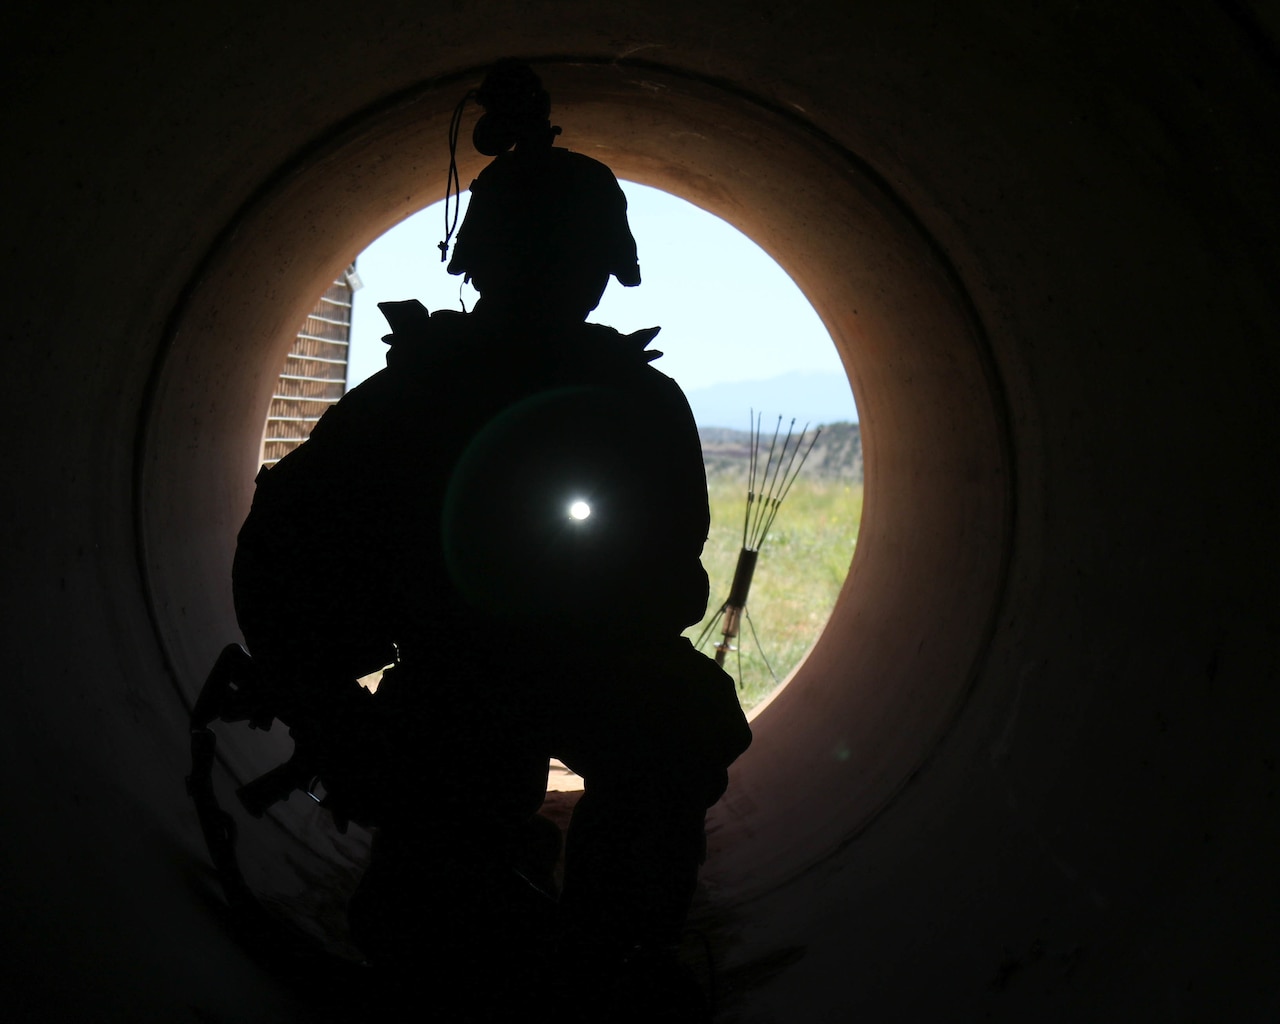 Army Sgt. Stephen Moreno, an explosive ordnance disposal specialist with the 797th Ordnance Company, searches a tunnel for booby traps at Fort Carson, Colo., June 14, 2017. Army photo by Spc. Anthony Bryant